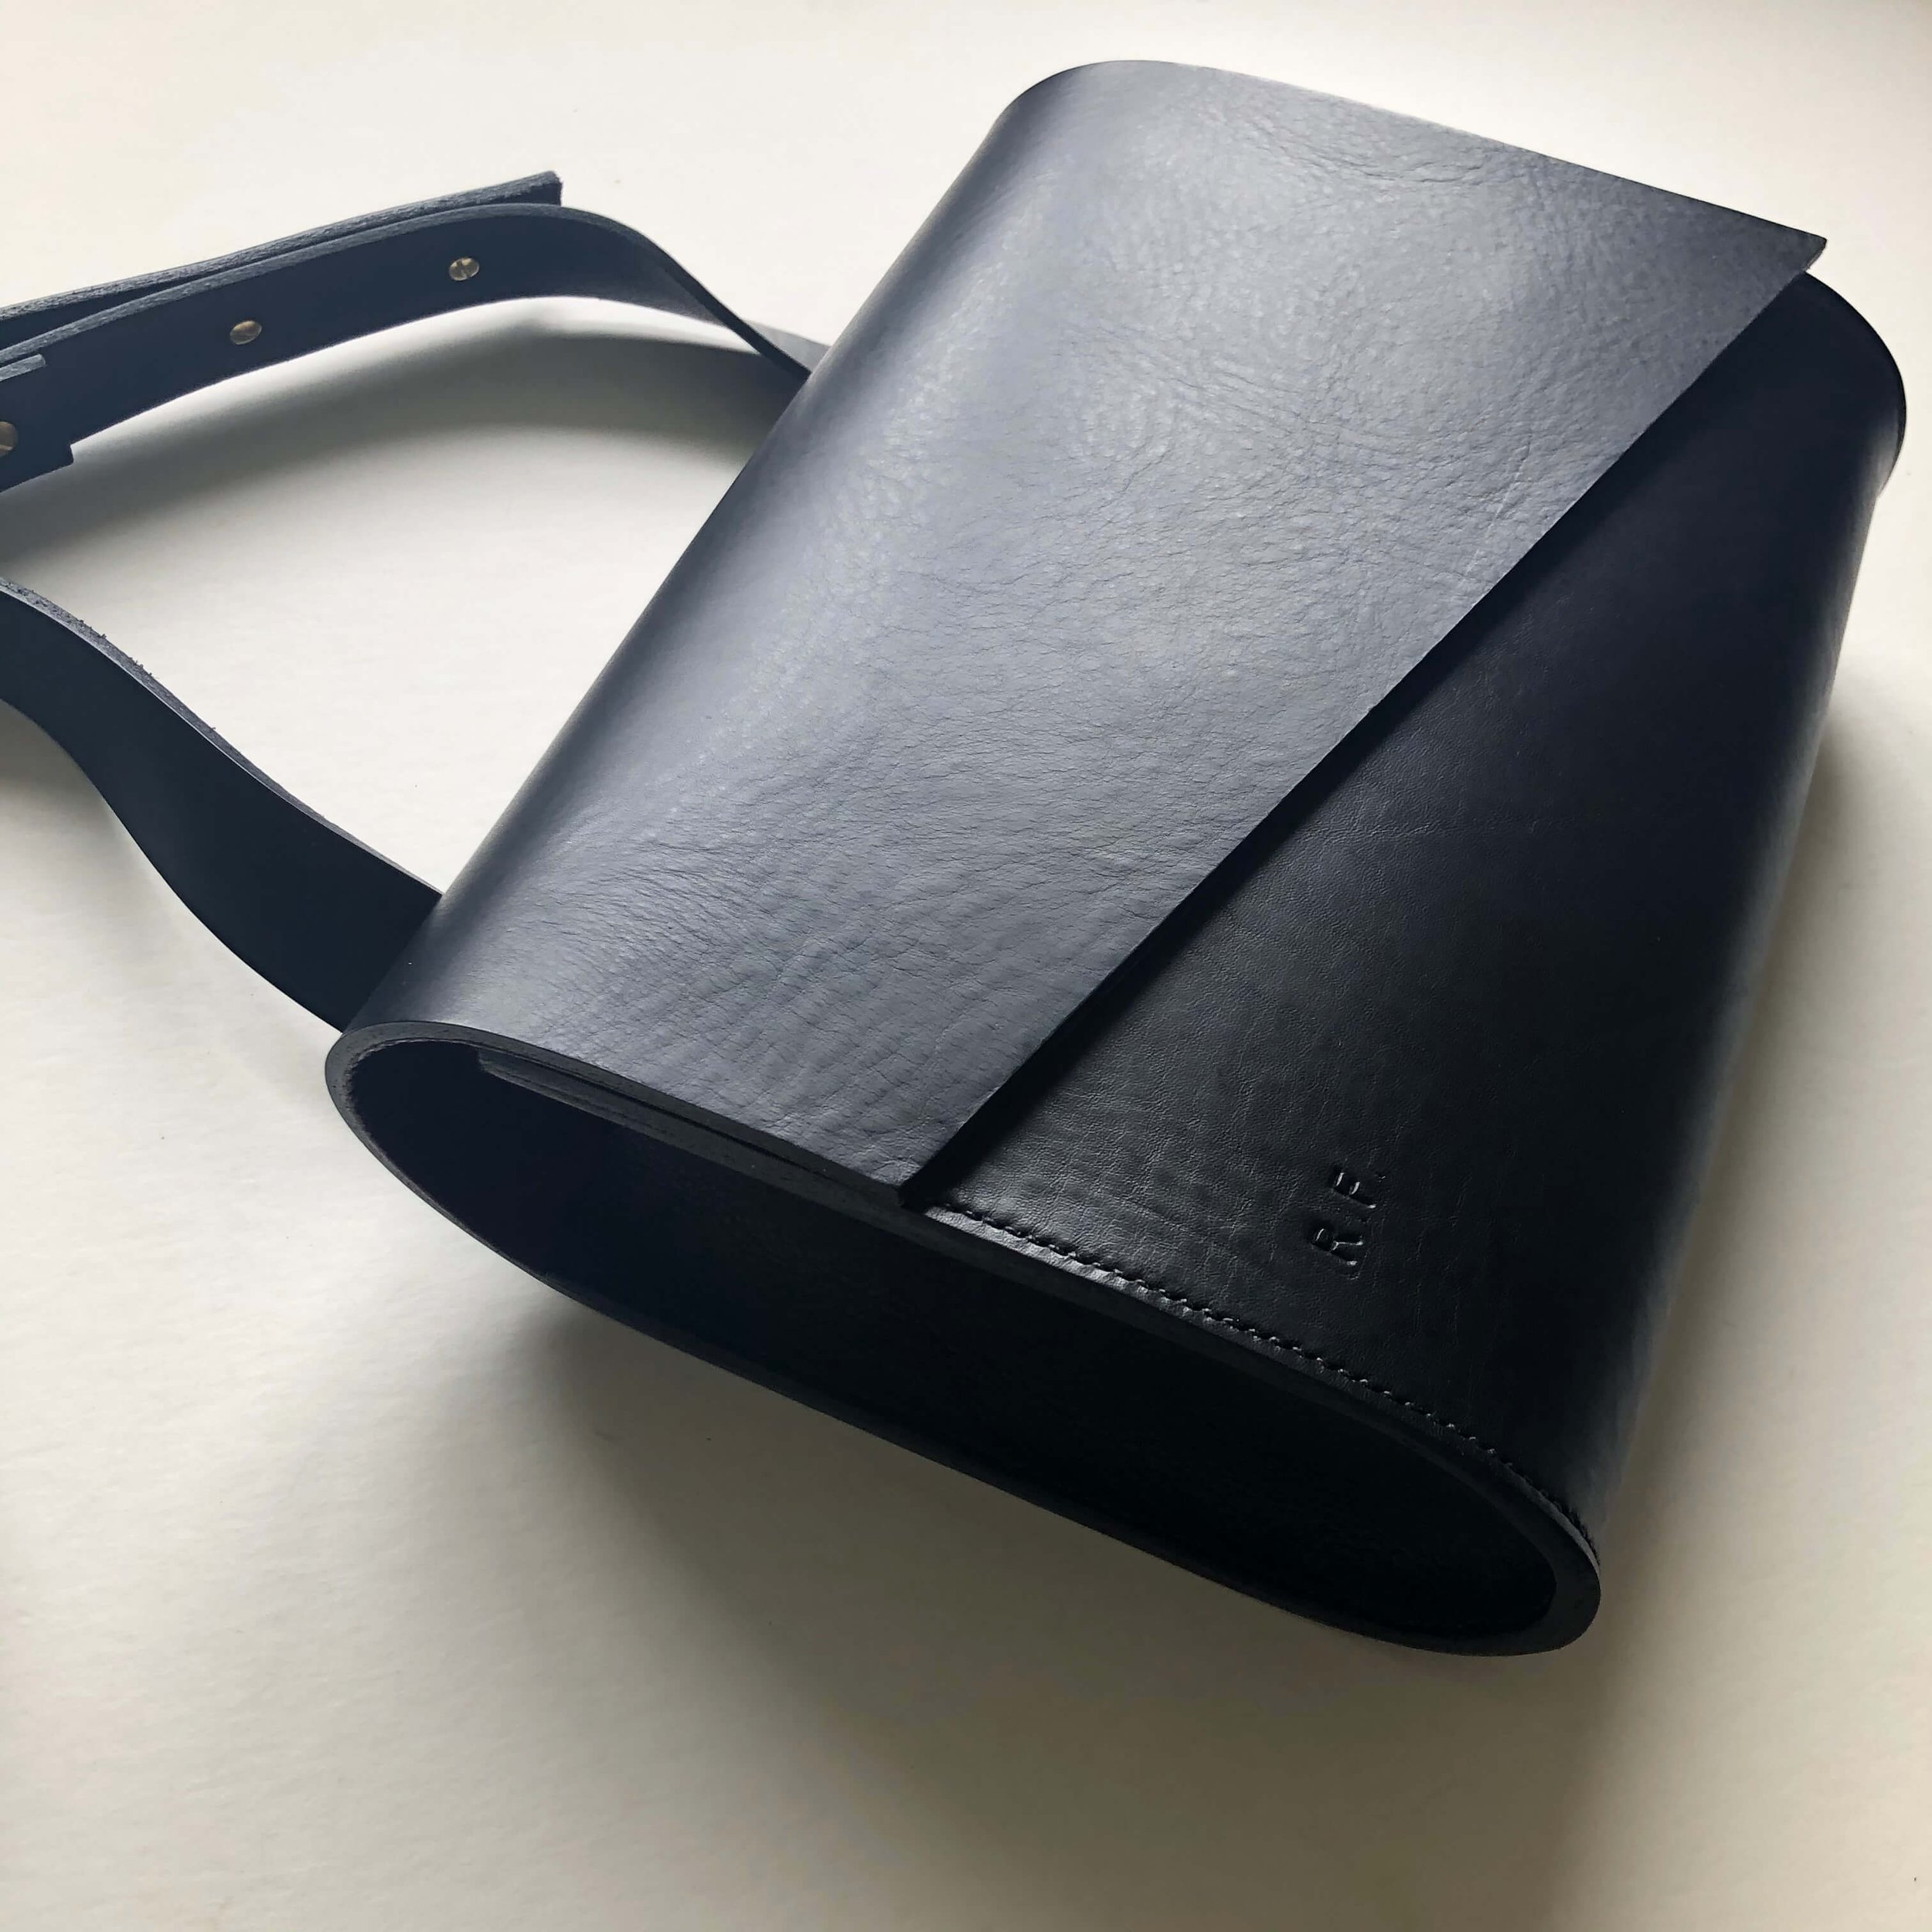 CARV sustainable leather bag in black handmade in the UK